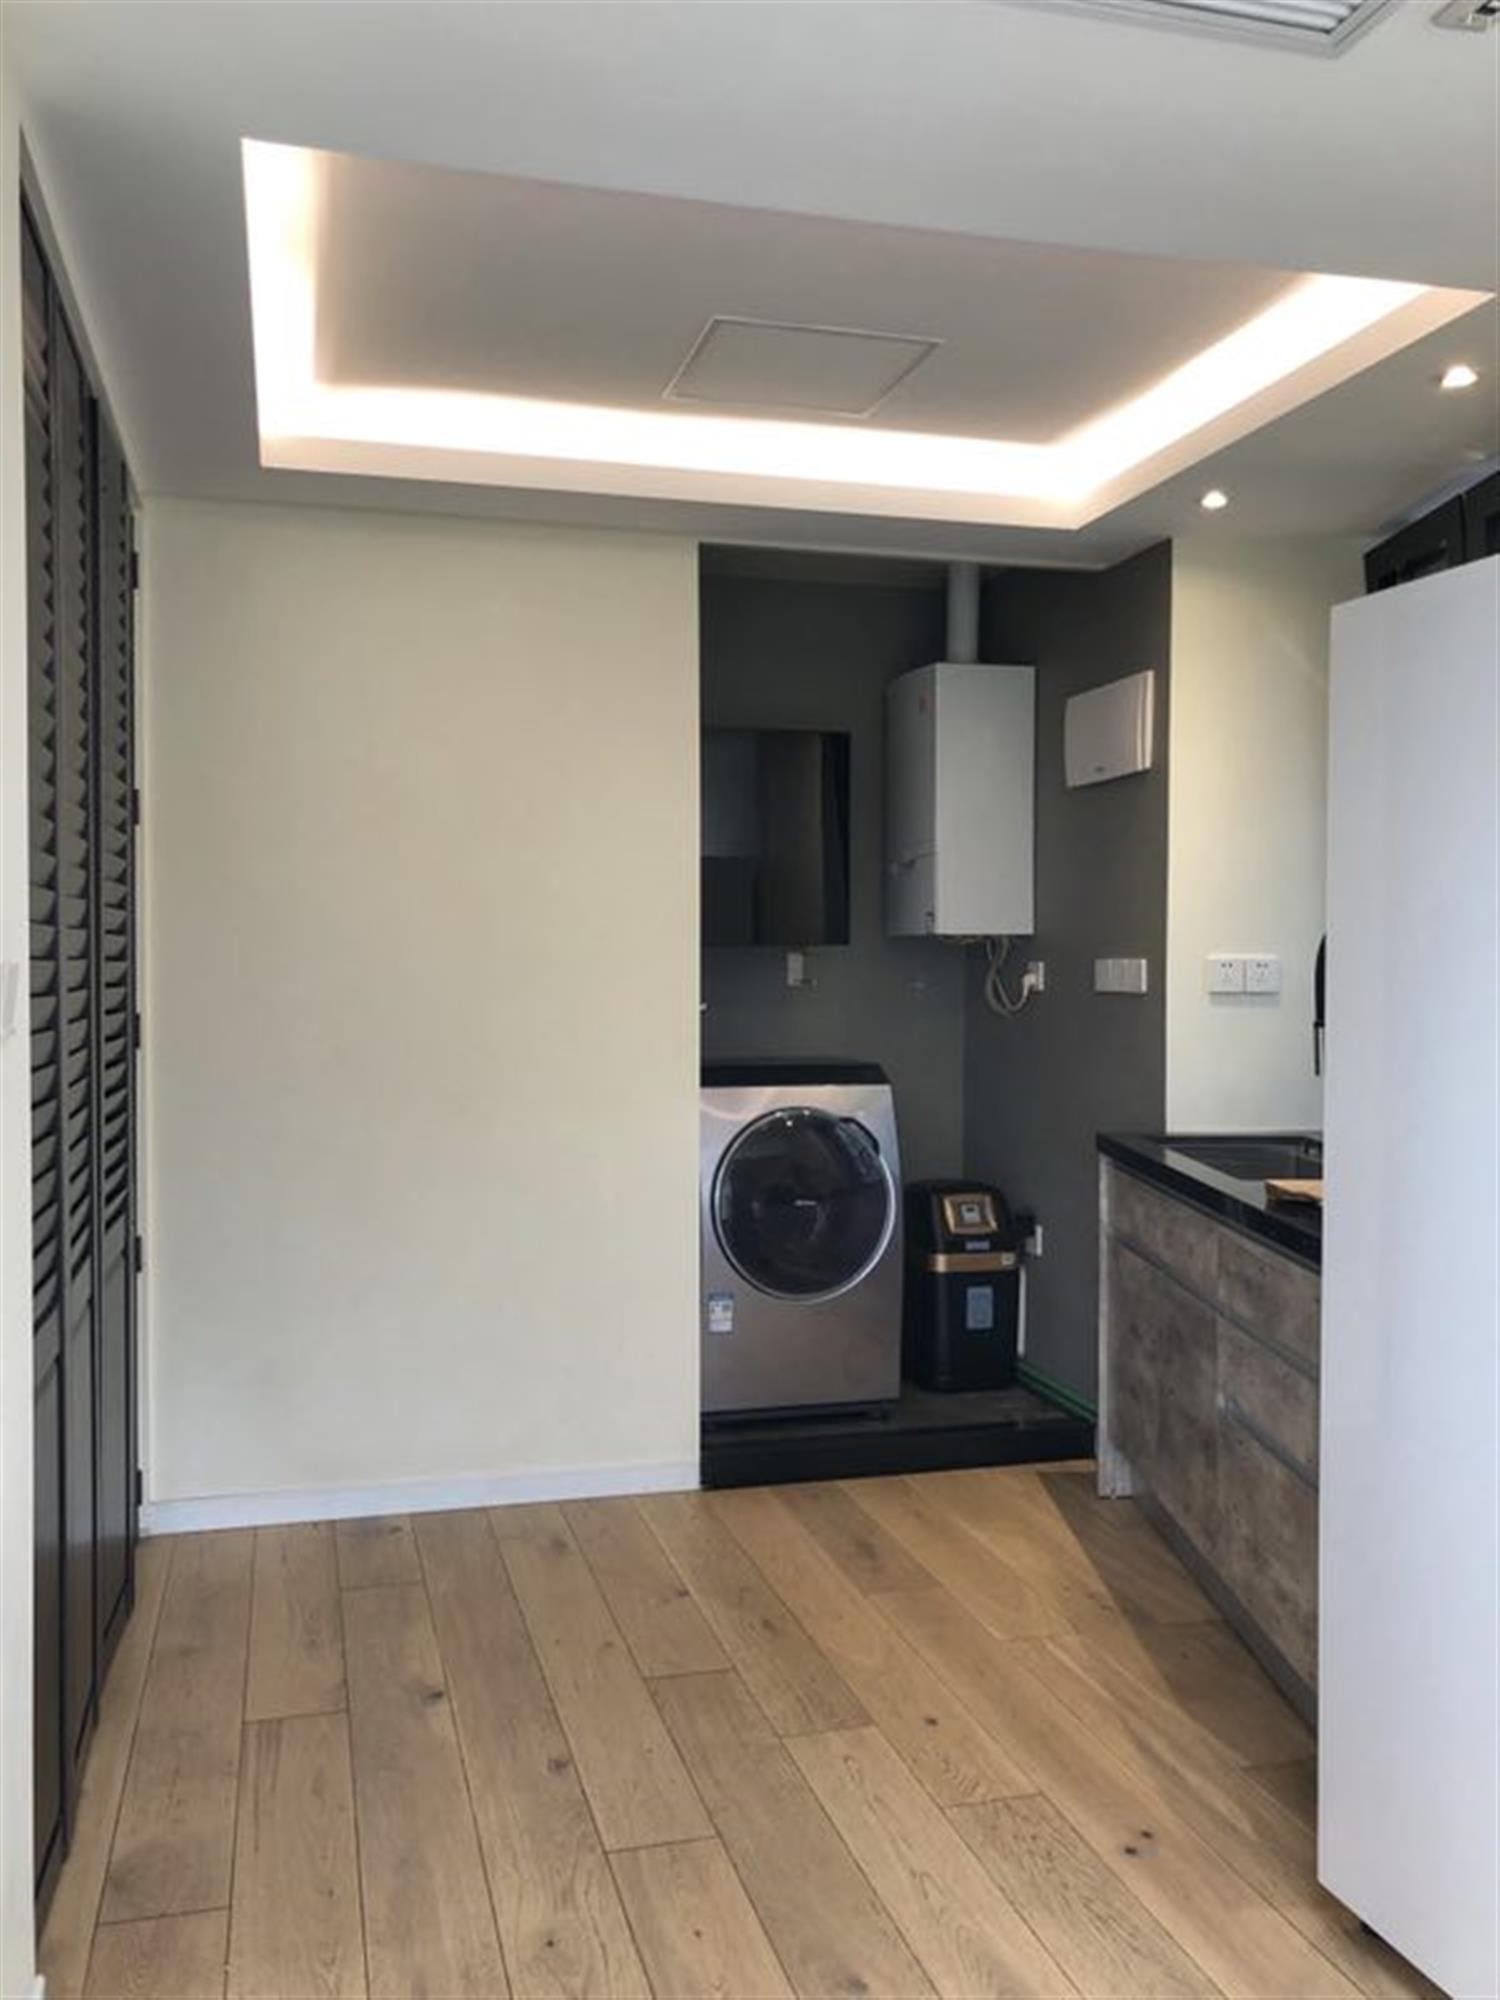 Laundry Area Huge Exclusive Yard with 1F of Standalone Hongqiao Lane House for Rent in Shanghai